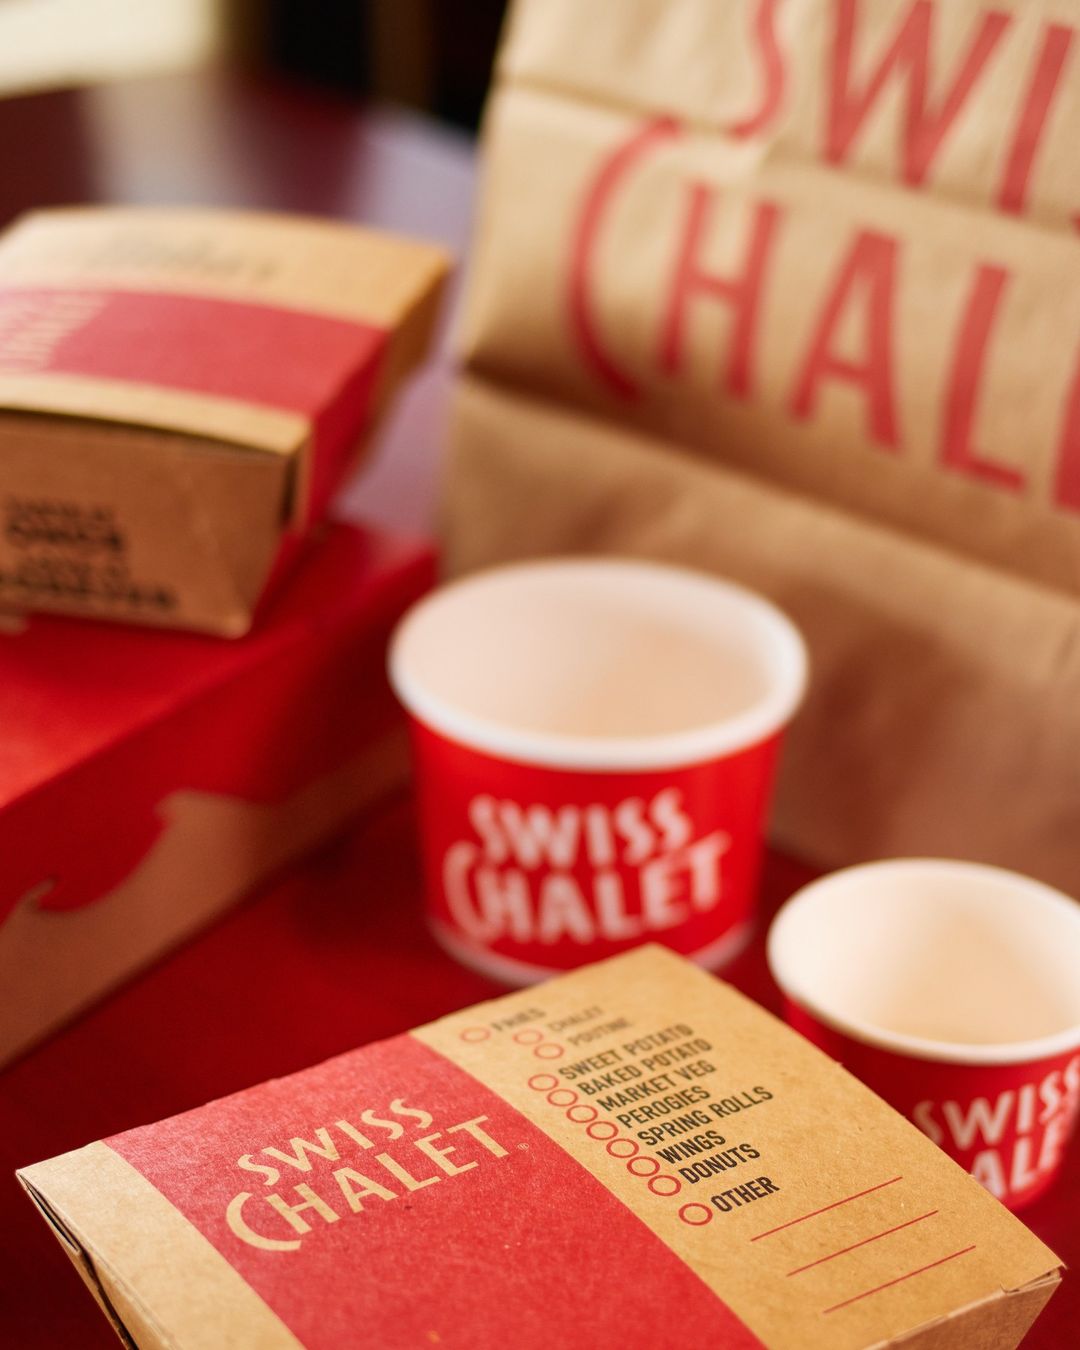 Swiss Chalet Launches Sustainable Packaging Across Canada